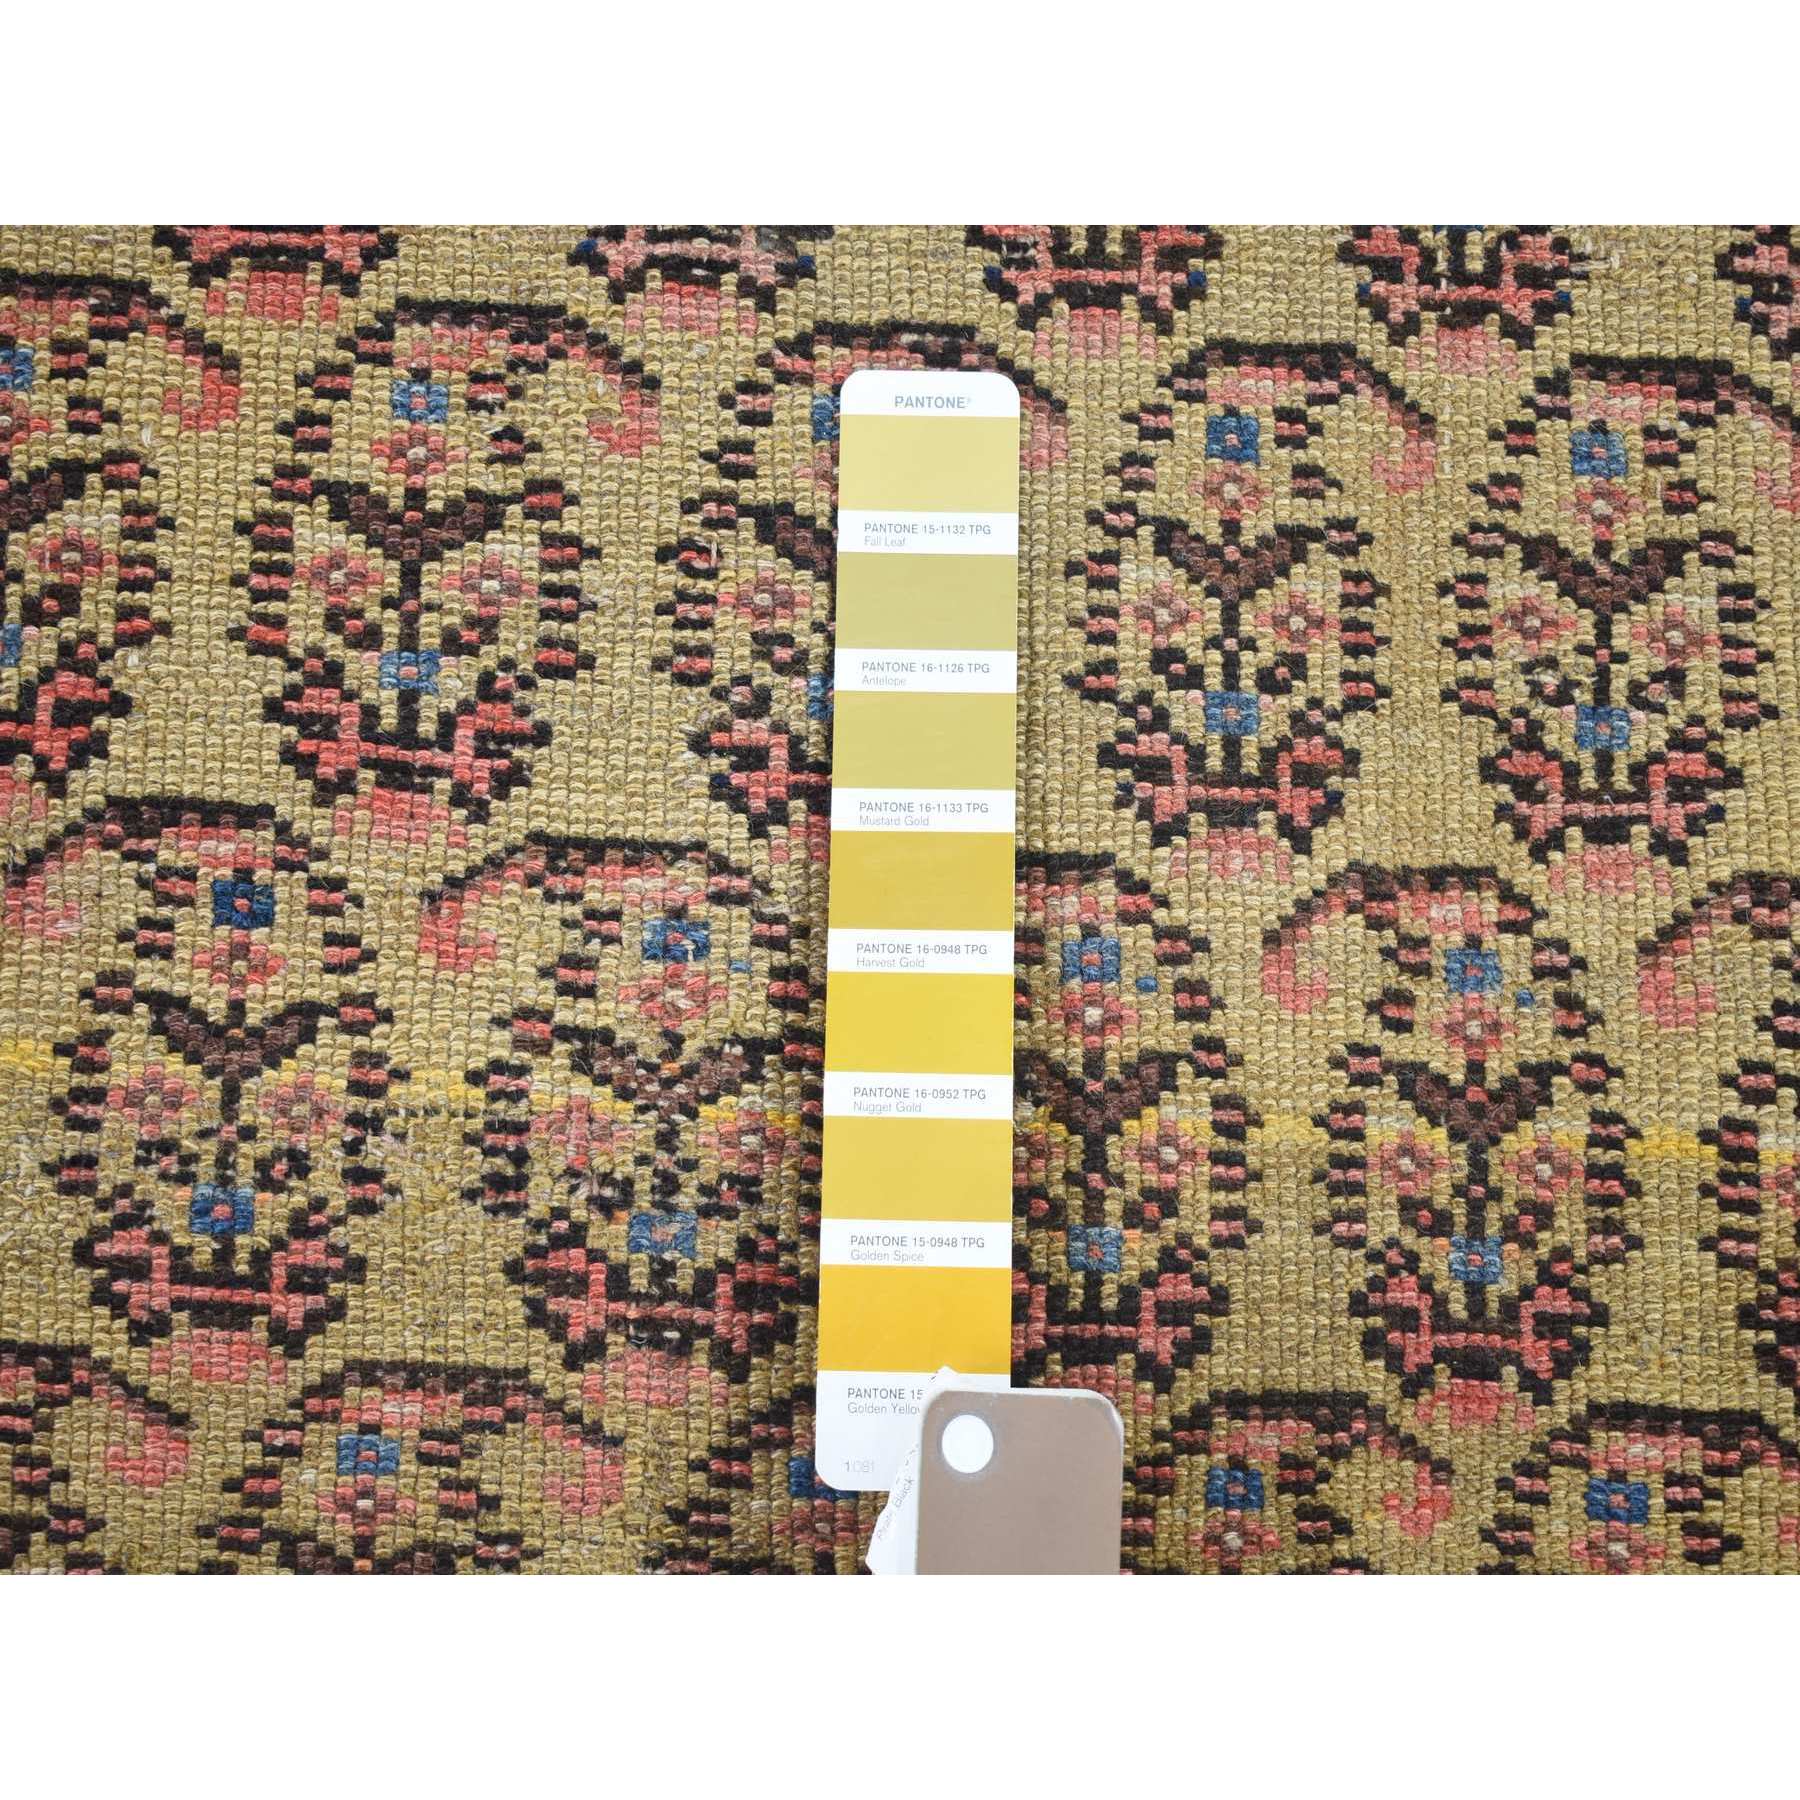 4'x10'3" Yellow, Antique Persian Bakshaish Abrash Paisley Design with Serrated Leaf Border, Excellent Condition Pure Wool, Clean Hand Woven, Wide Runner Oriental Rug 